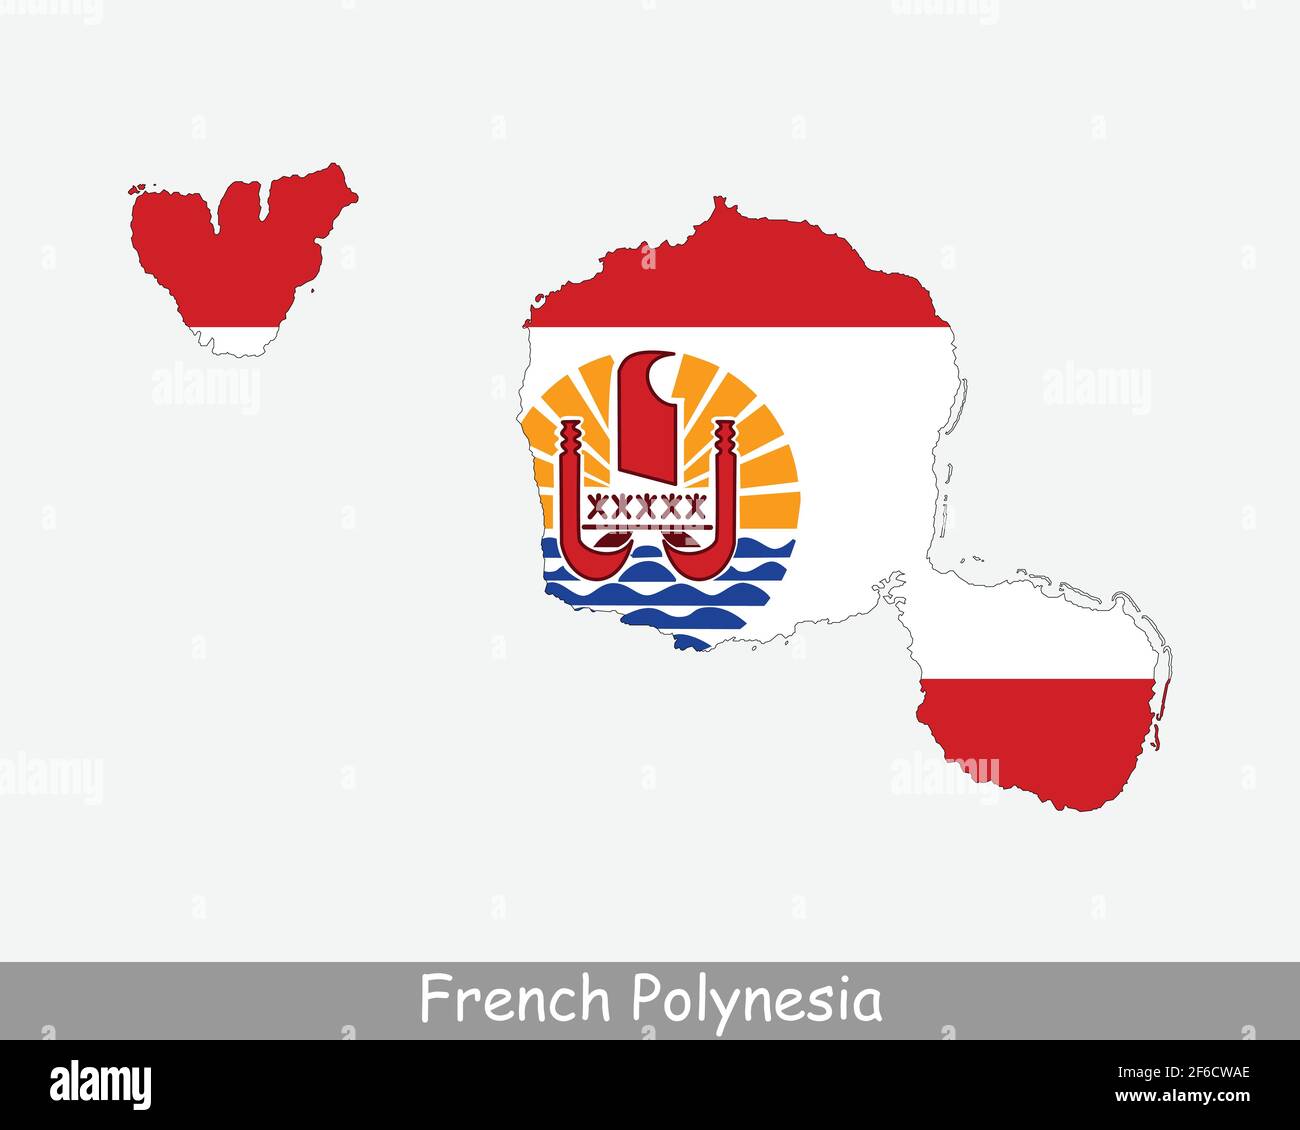 French Polynesia Map Flag. Map of French Polynesia with flag isolated on white background. Overseas country and collectivity of France. Vector illustr Stock Vector